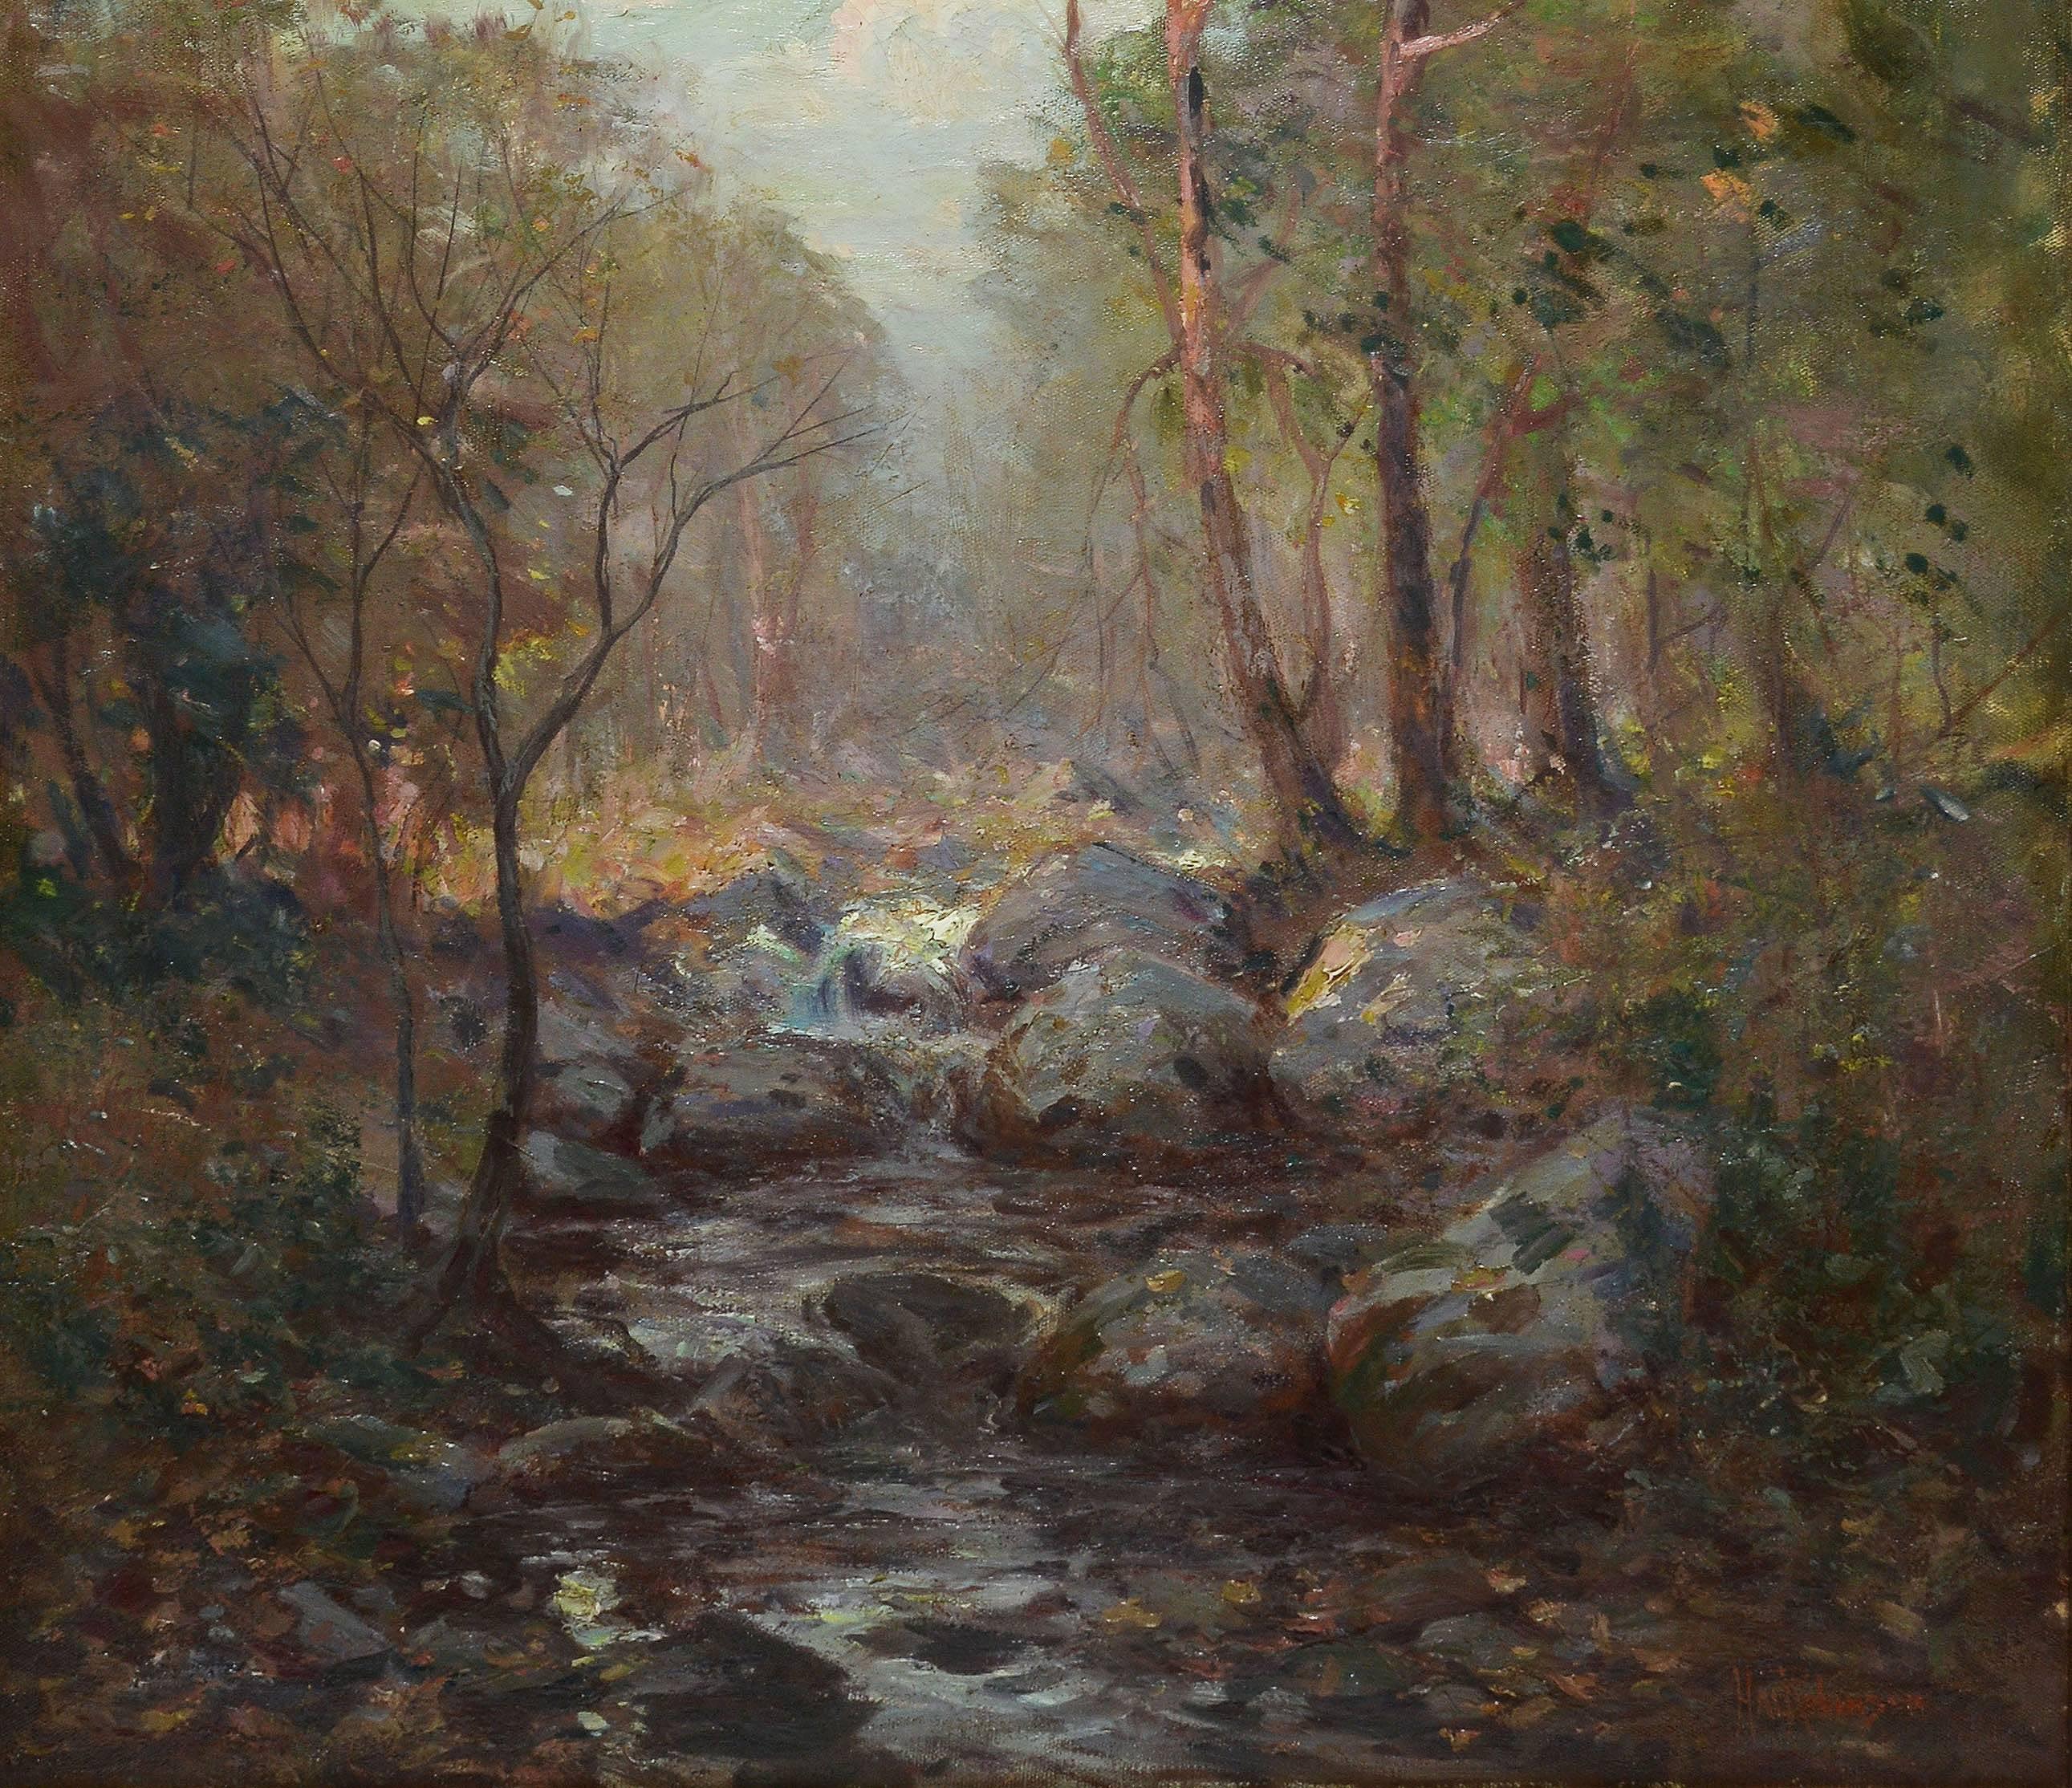 Impressionist landscape with a stream by Hal Robinson (1875-1933). Oil on canvas, circa 1900. Signed lower right, "Hal Robinson".  Displayed in a giltwood frame. Image, 25"L x 30"H, overall, 32"L x 37"H.
